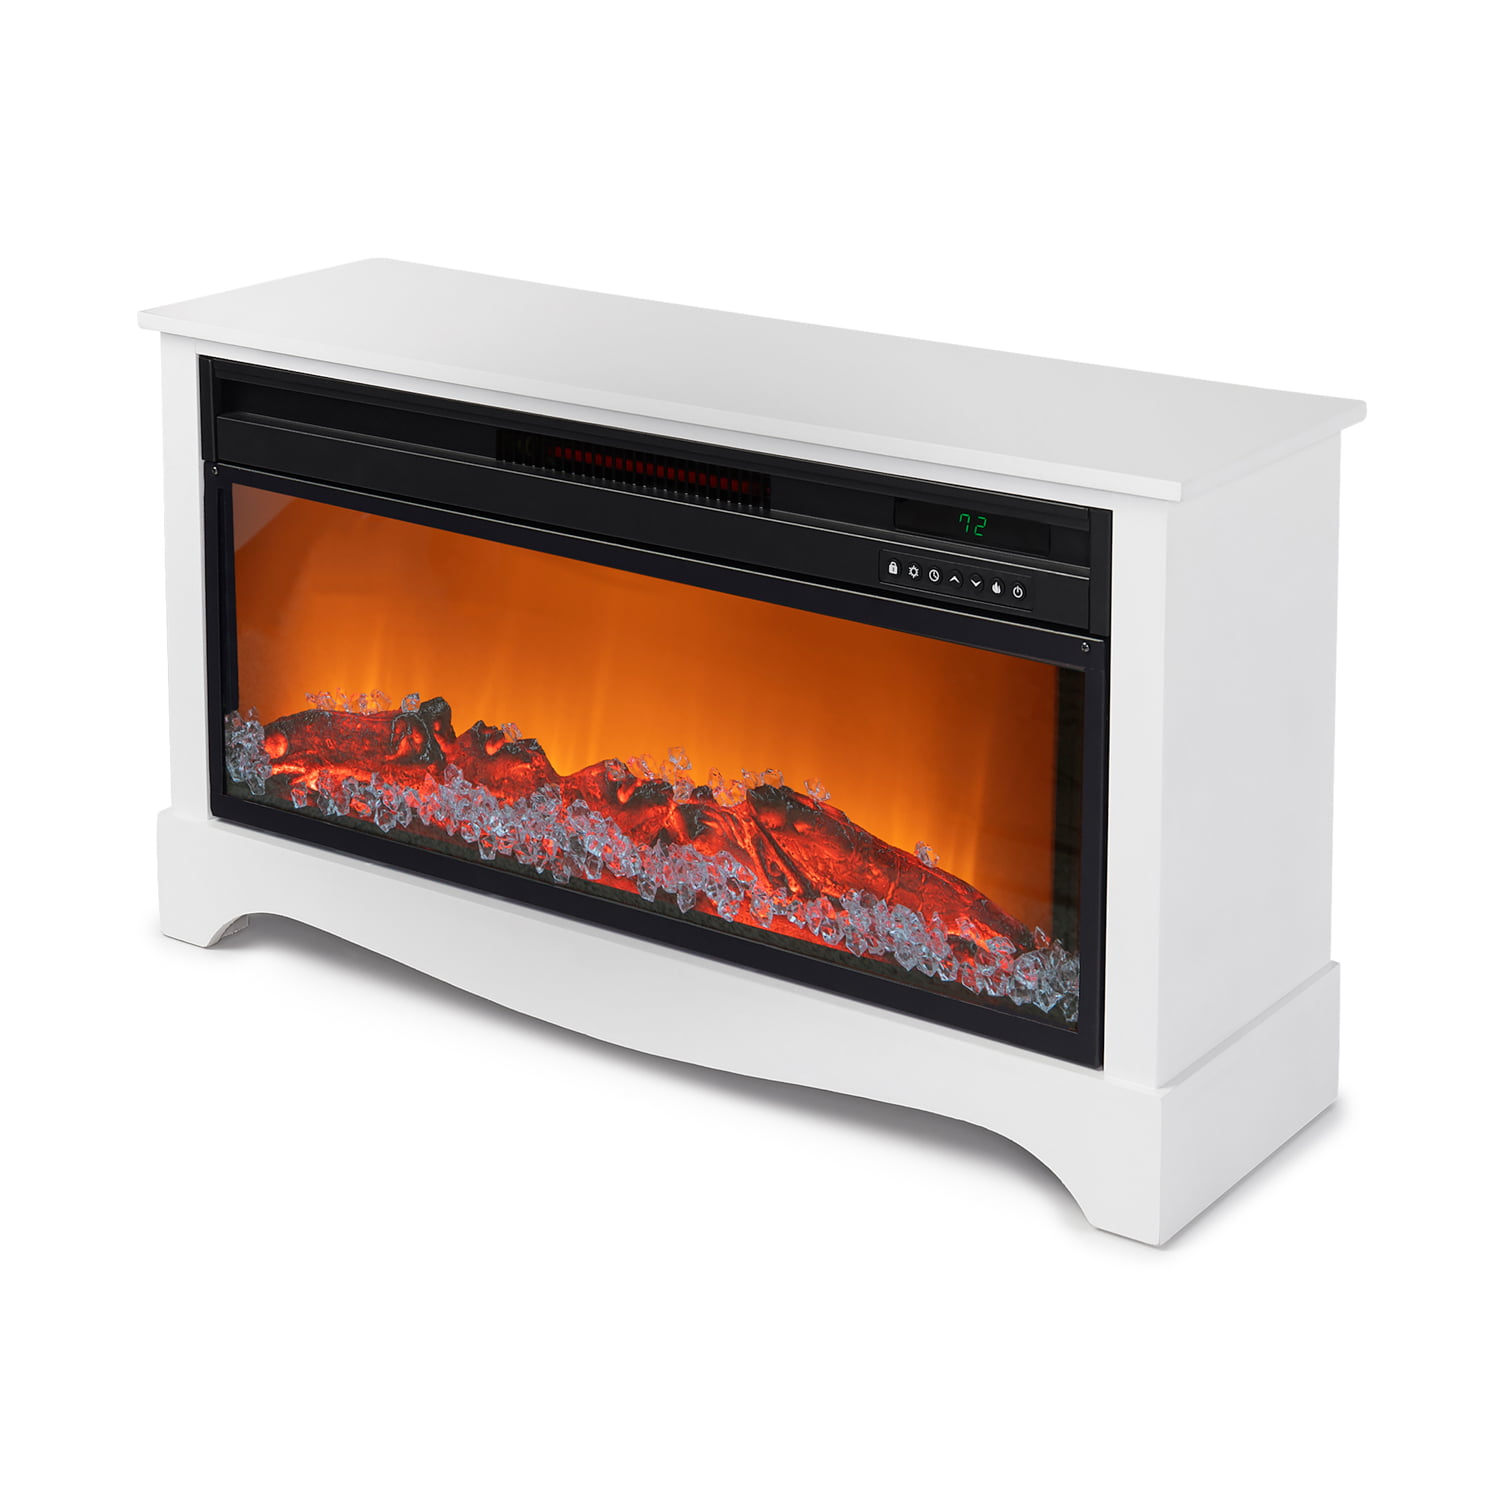 Infrared fireplace heater